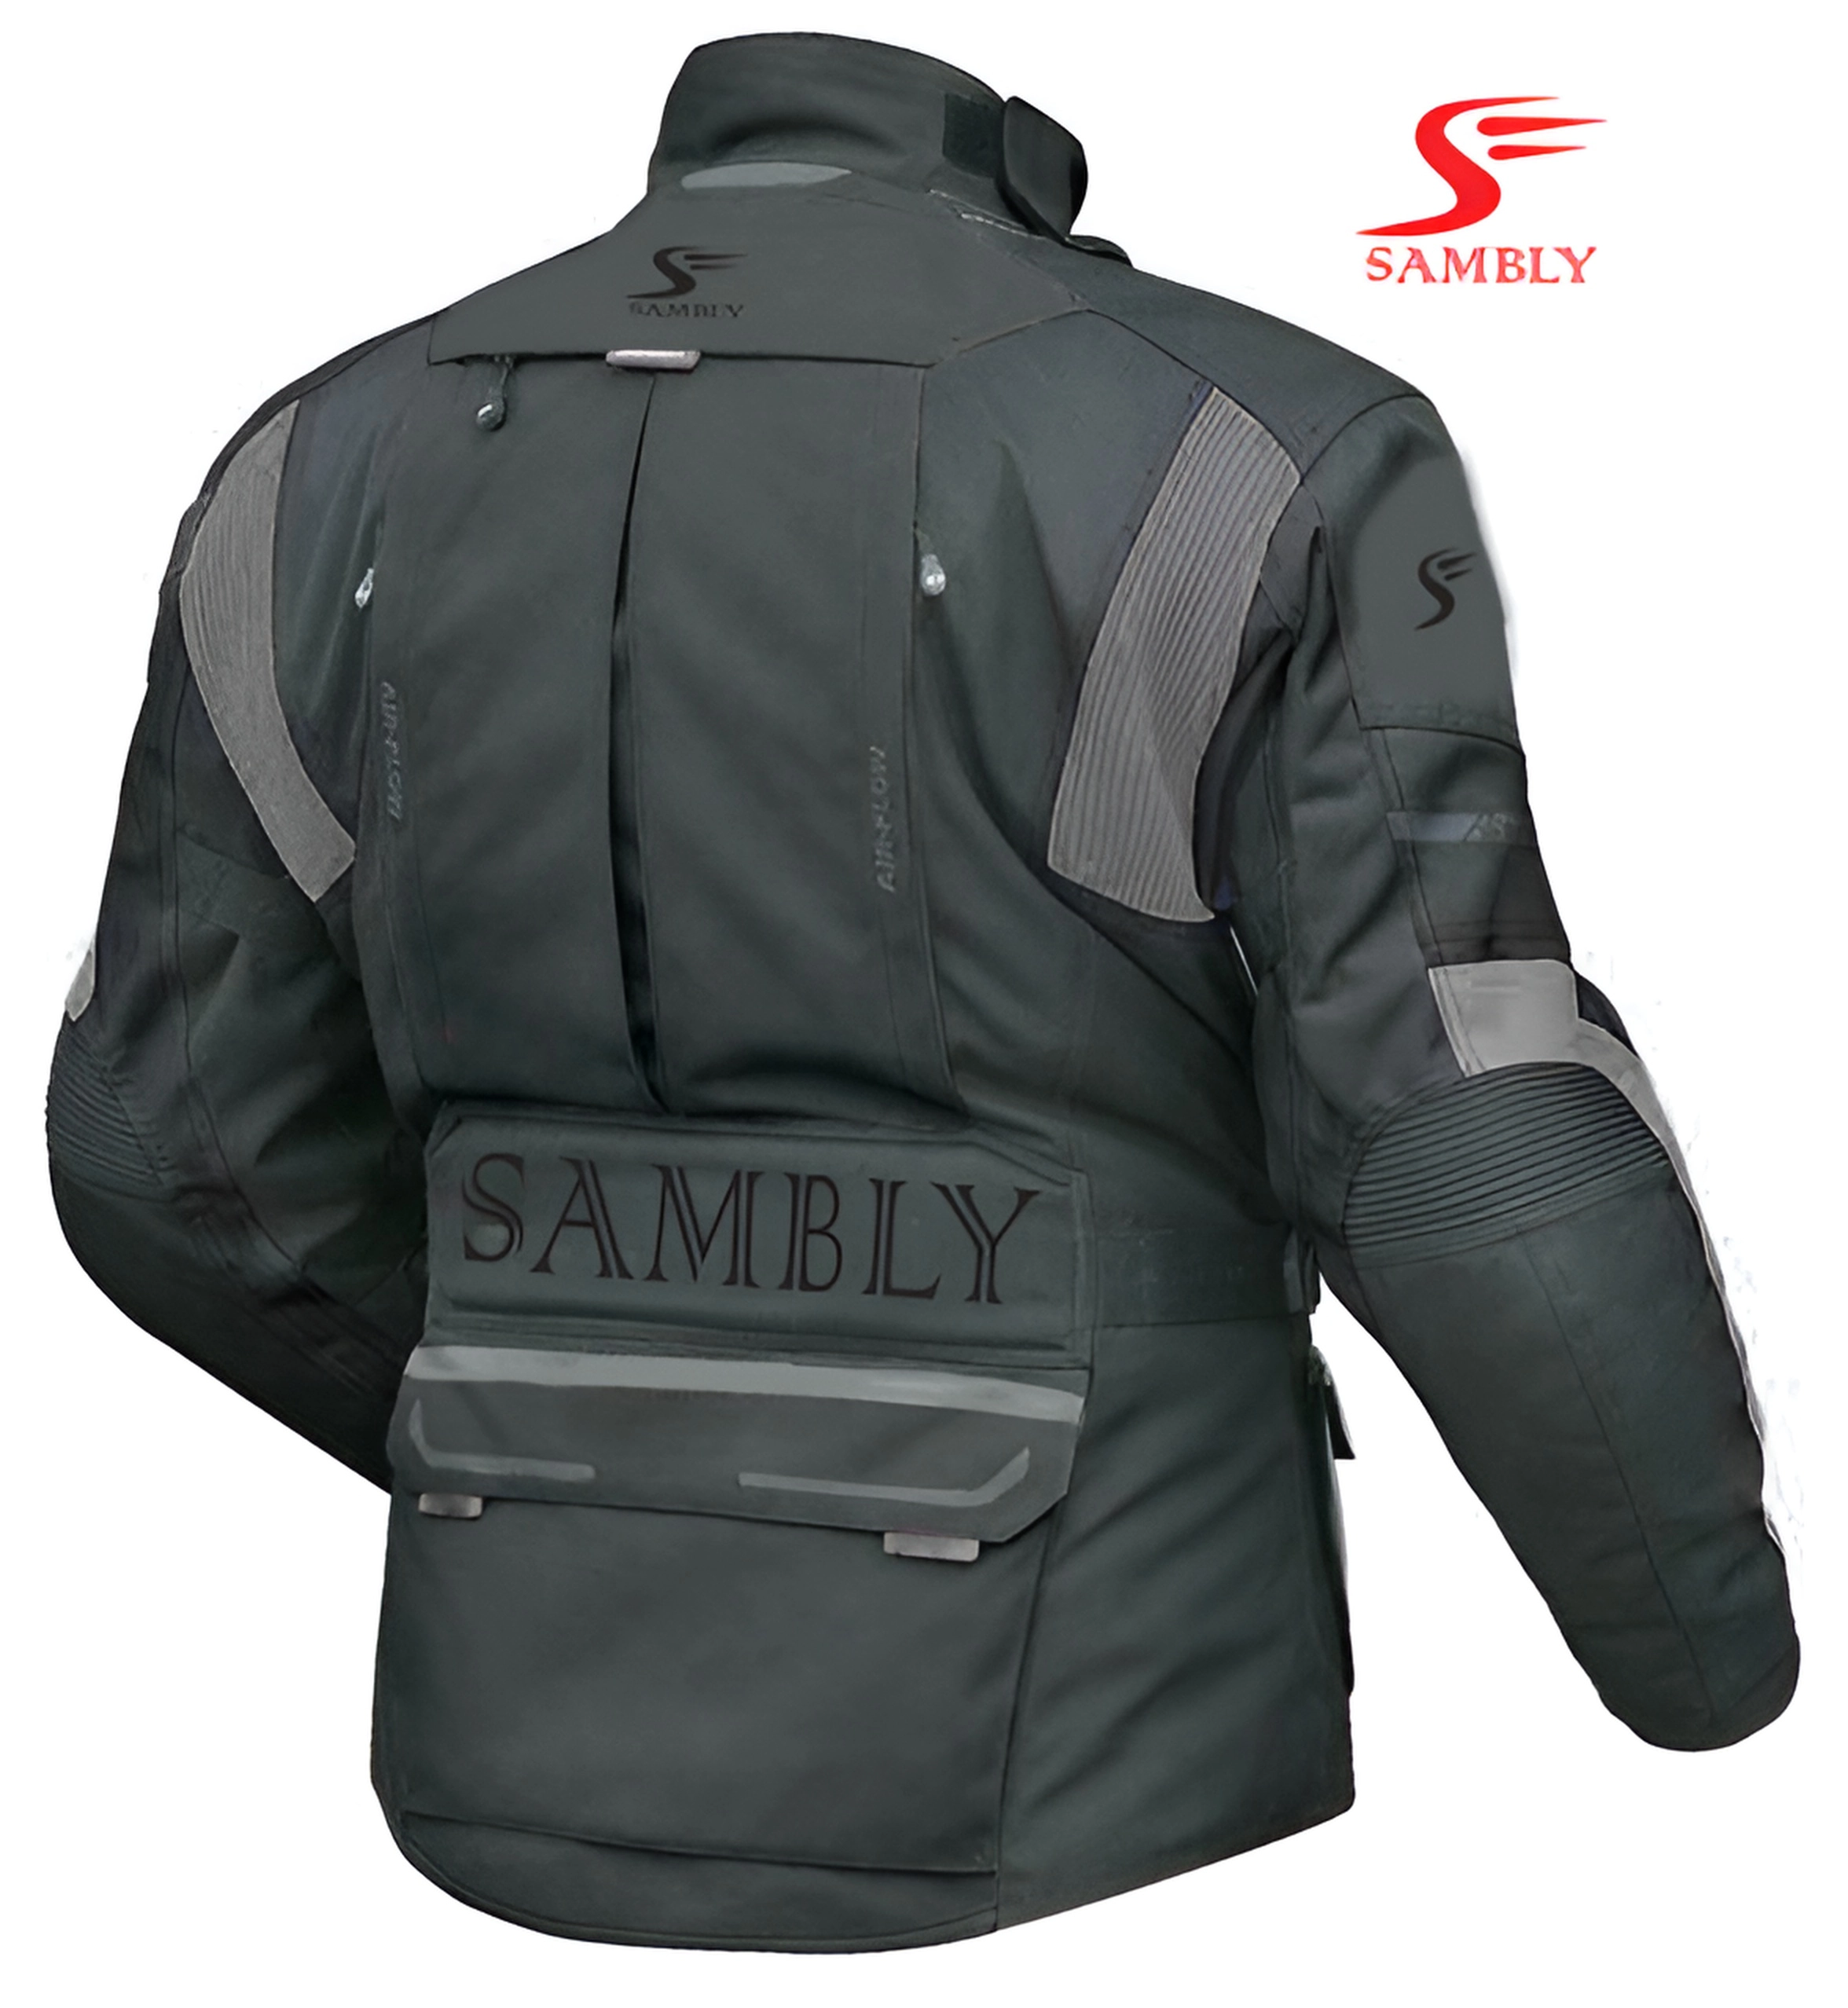 Back view of the Motorbike Textile Jacket SS-514 by Sambly Sports